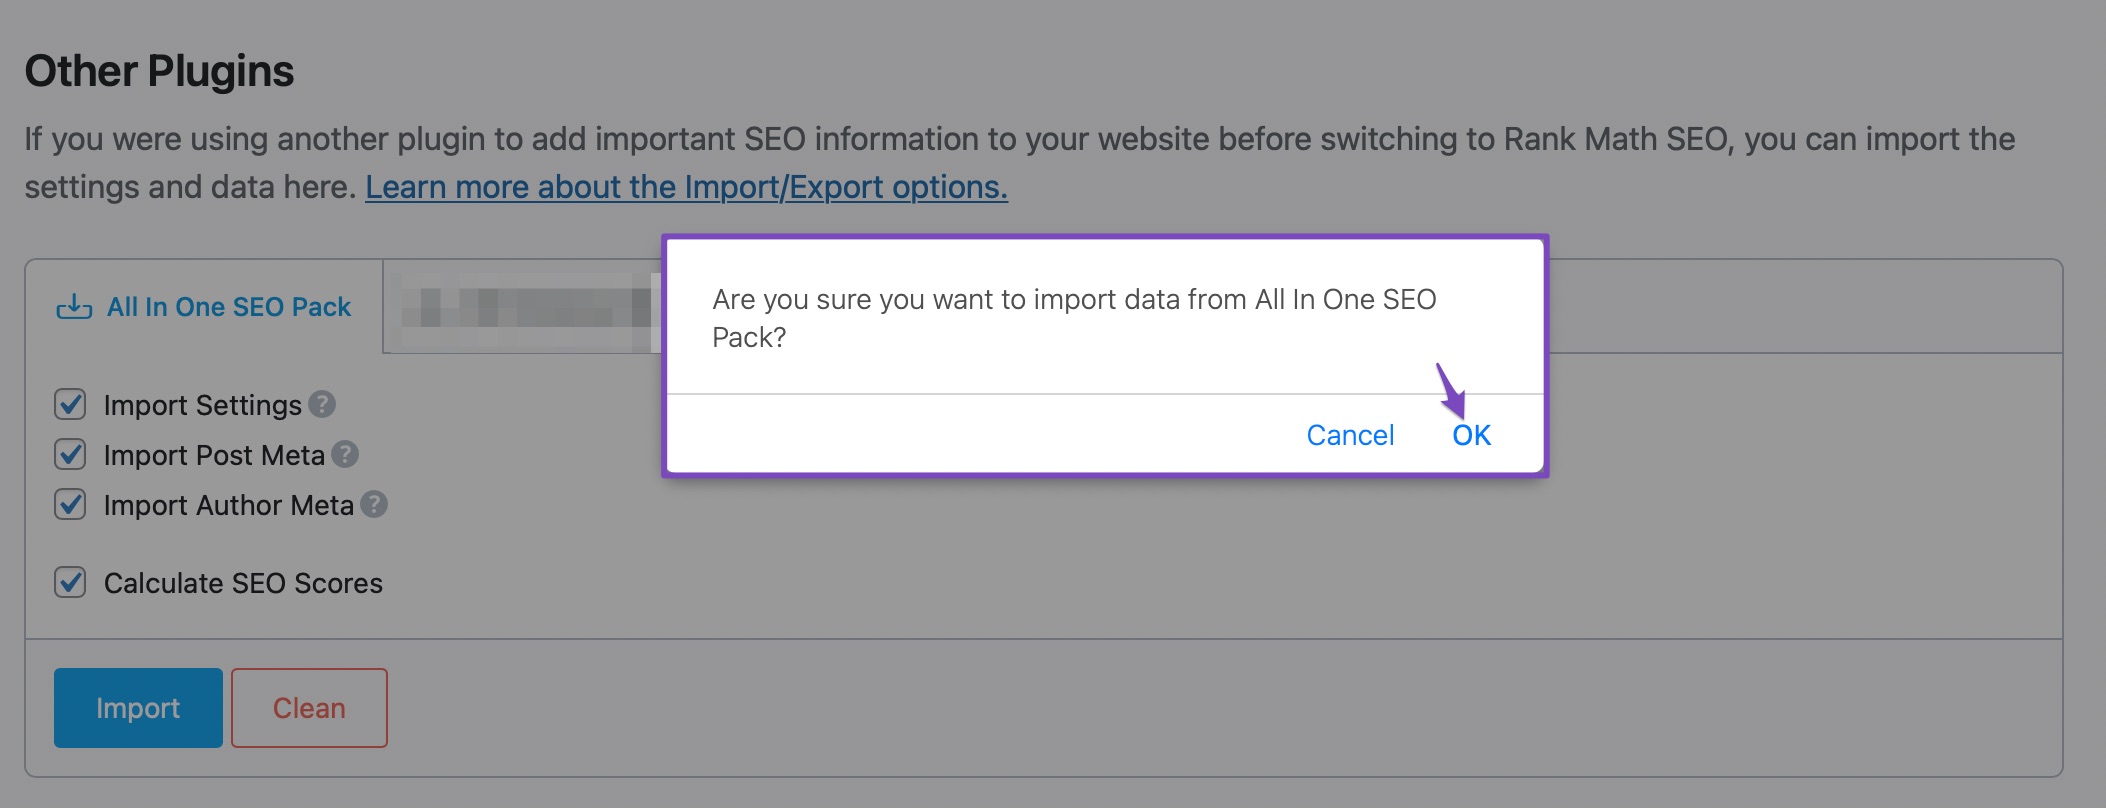 All In One SEO Pack import confirmation prompt